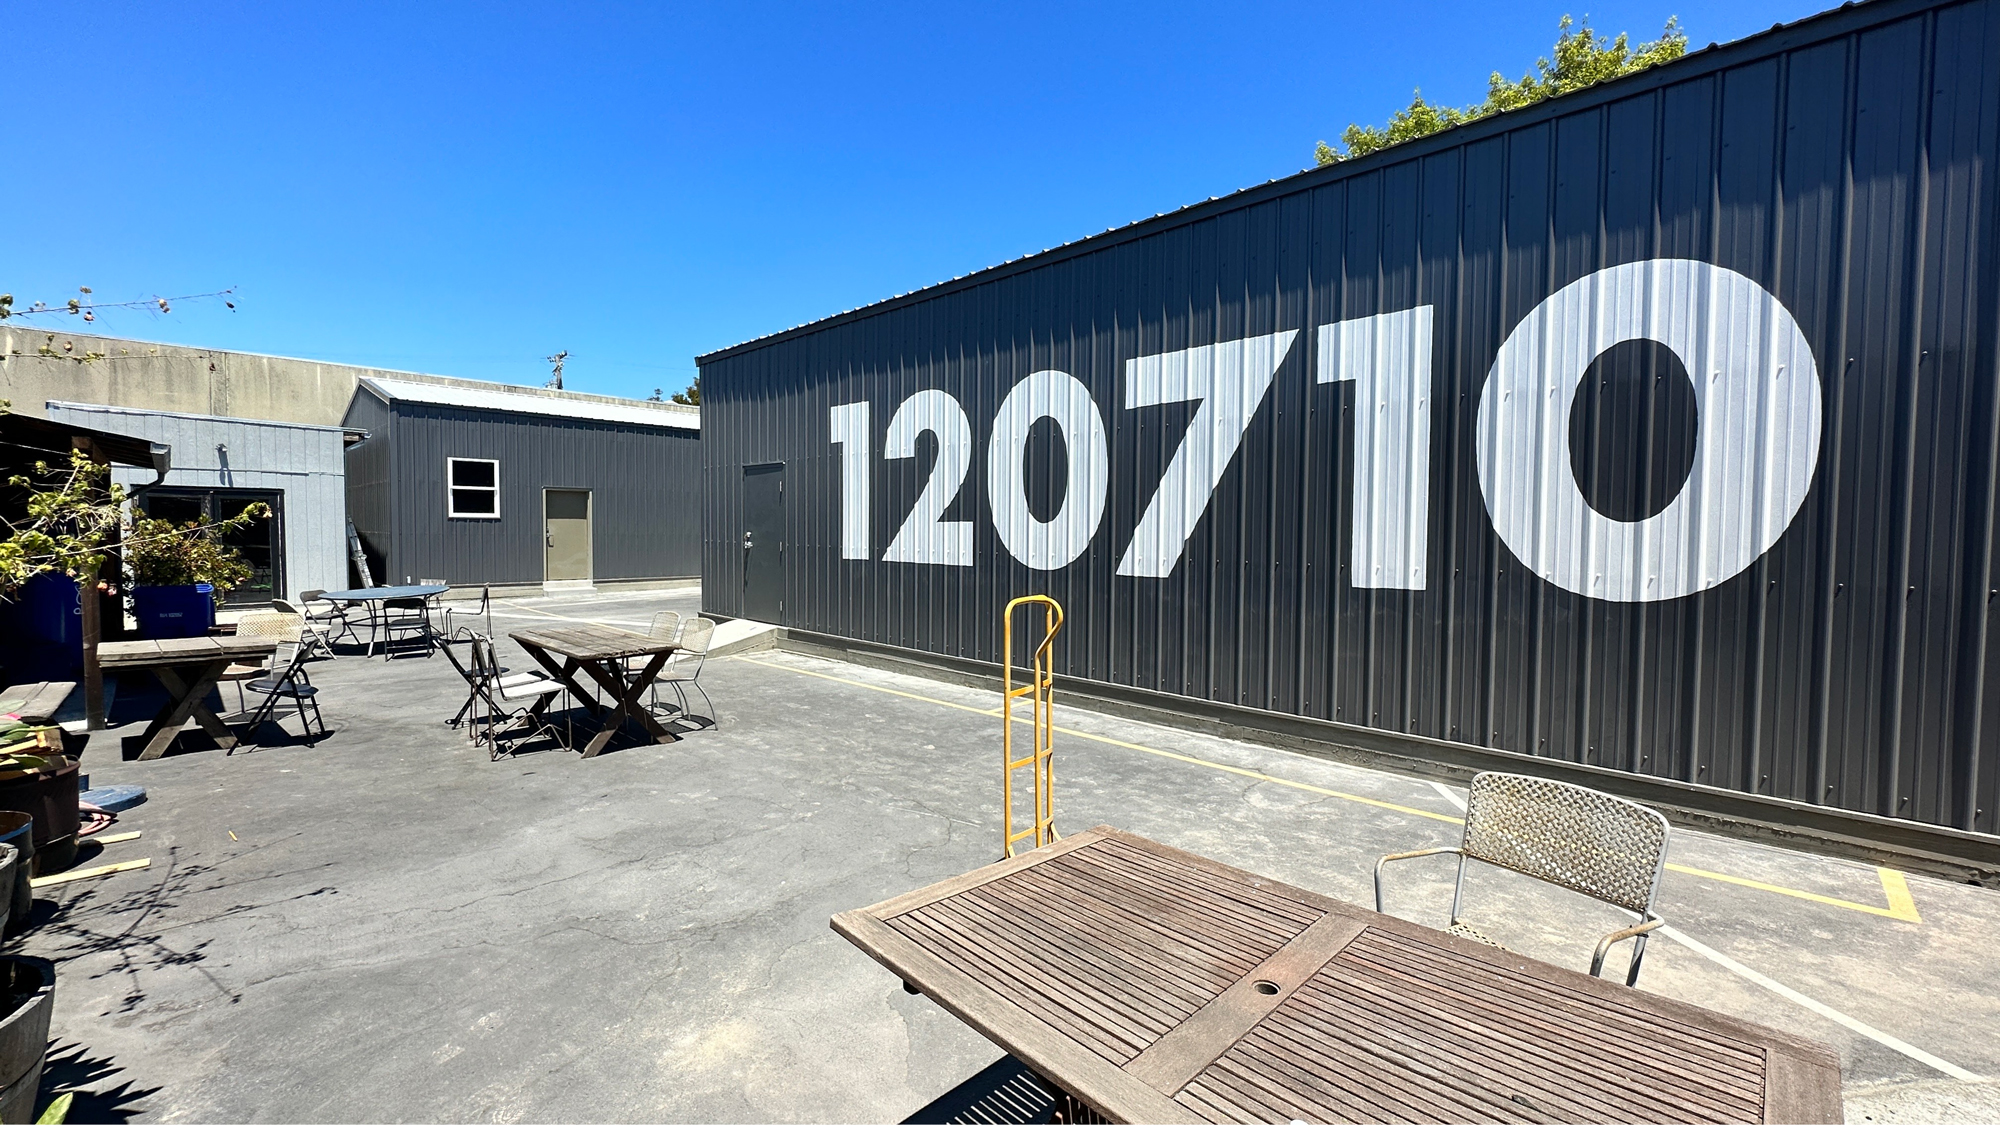 Concrete courtyard with tables bounded by gray containers, one with "120710" painted on the side in large white numbers